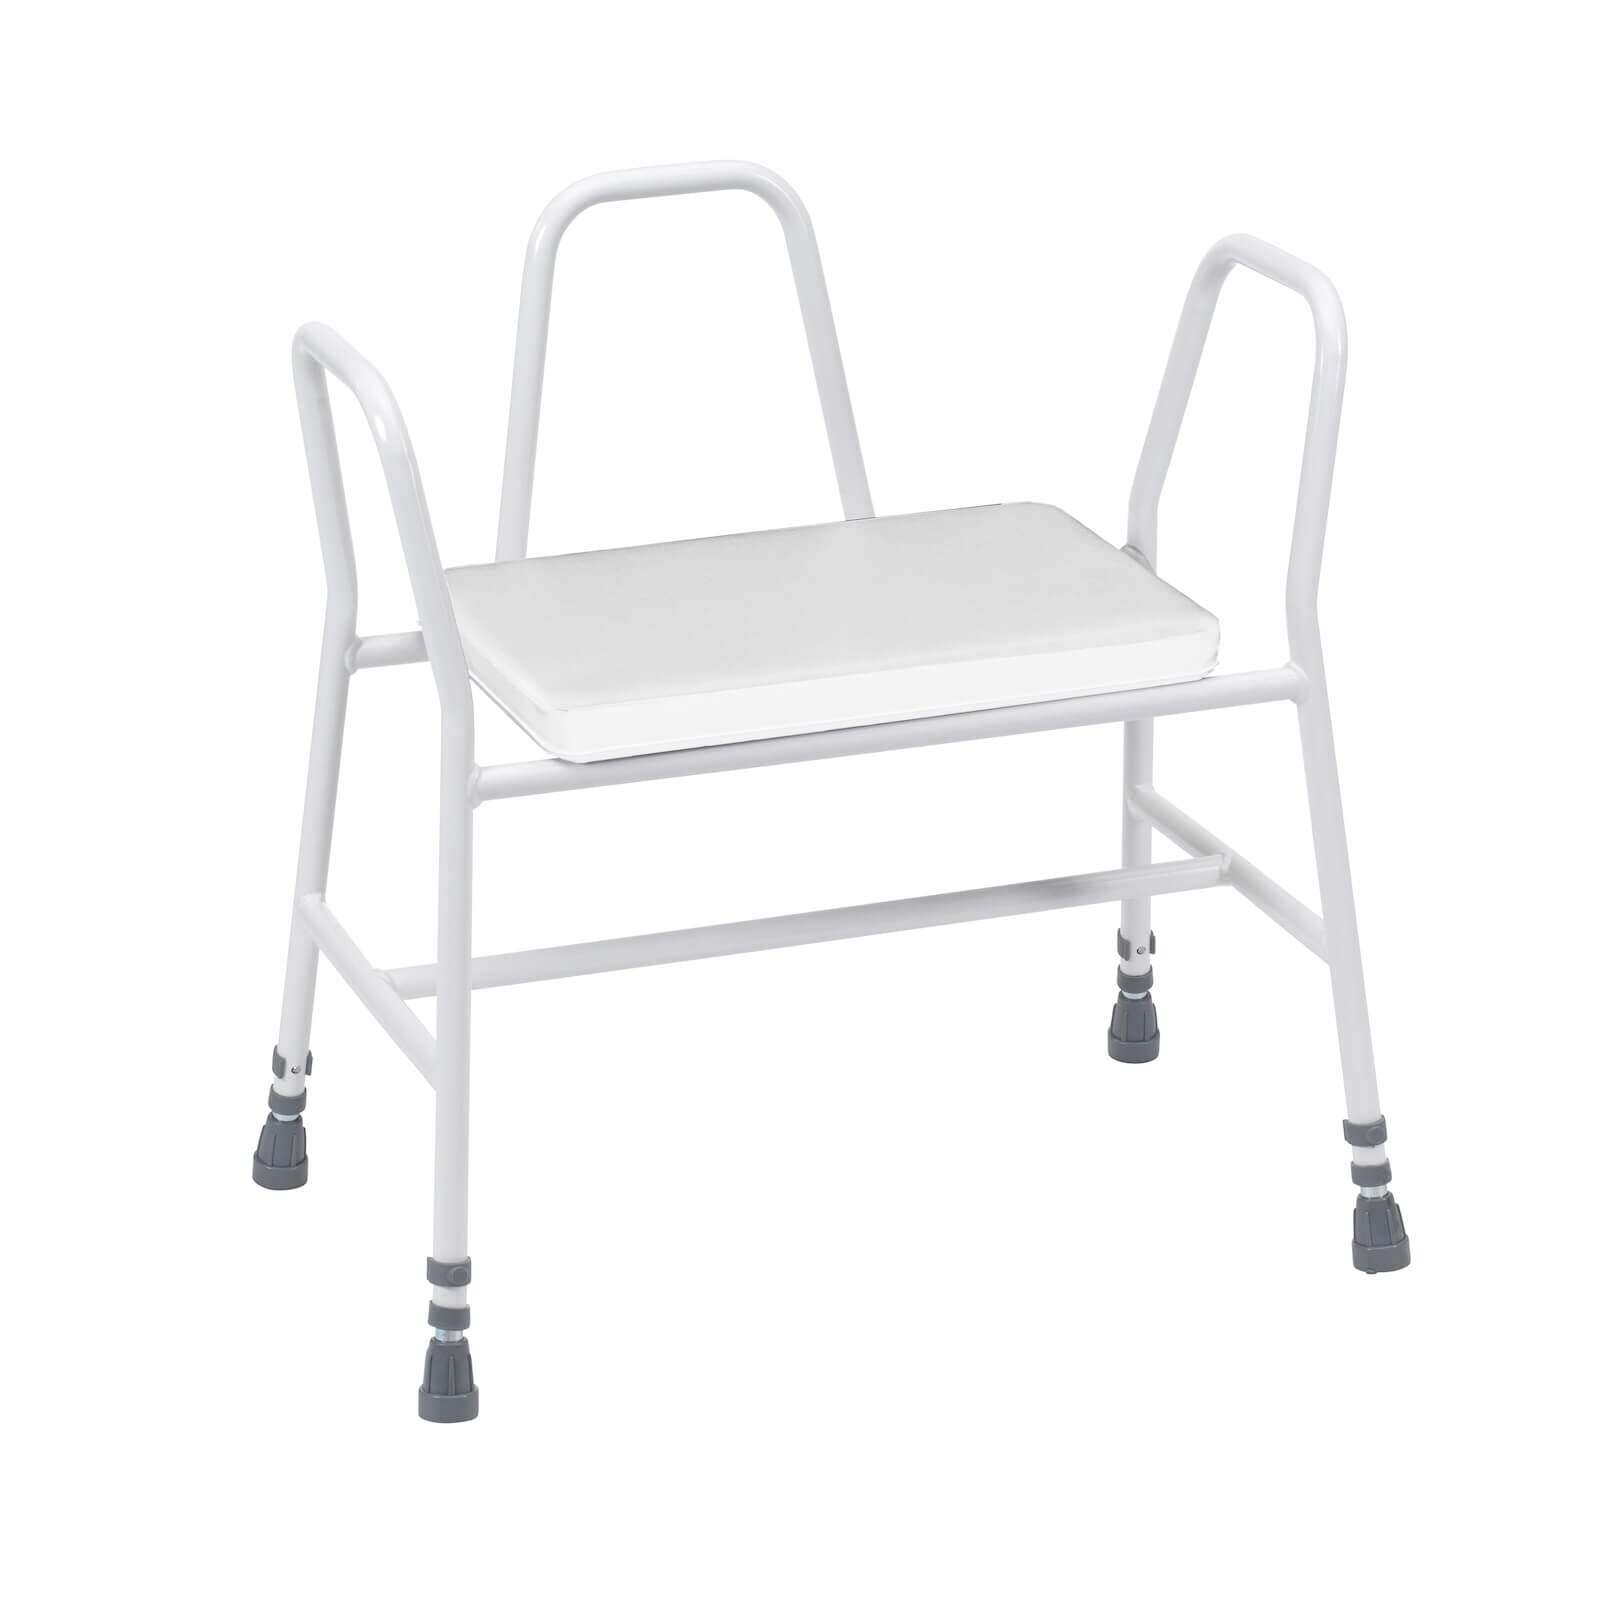 View Bariatric Perching Kitchen Stool Stool with Tubular Armrests and Back information